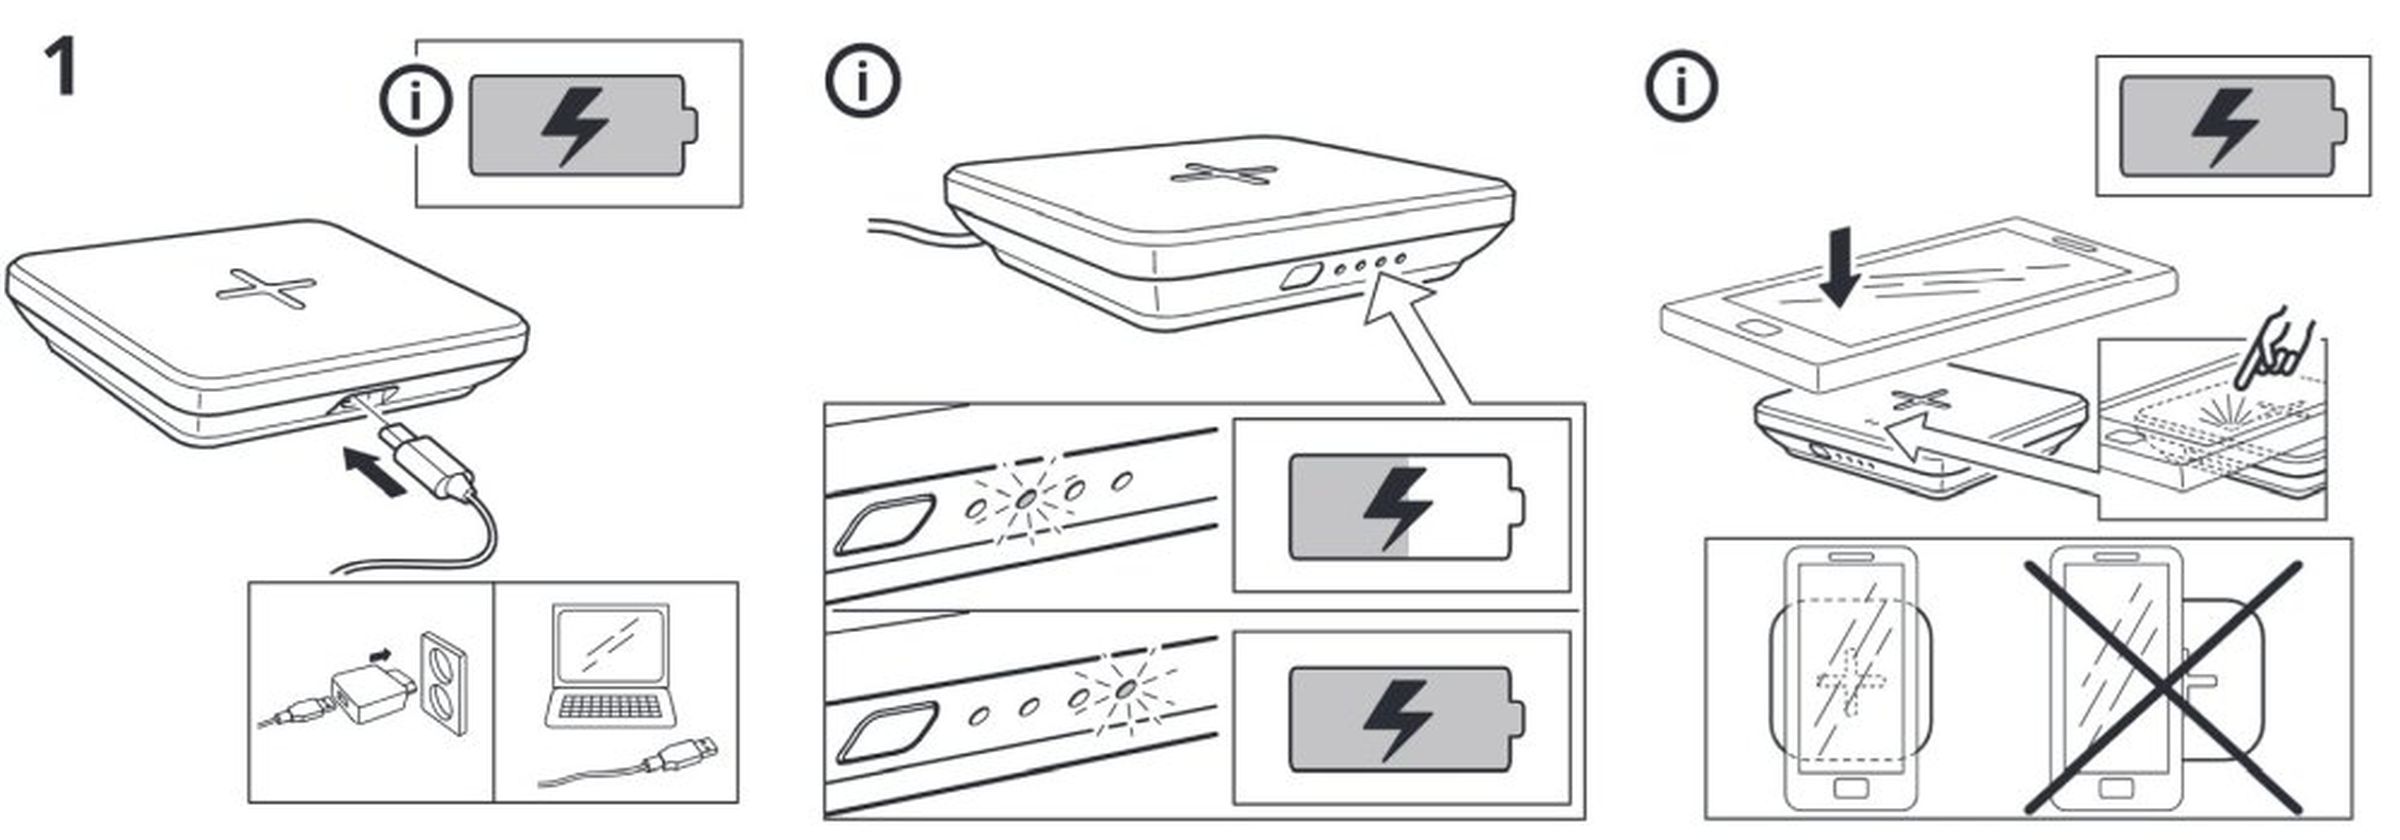 Ikea Nordmärke portable wireless charger manual describes how to charge and use the battery pack.